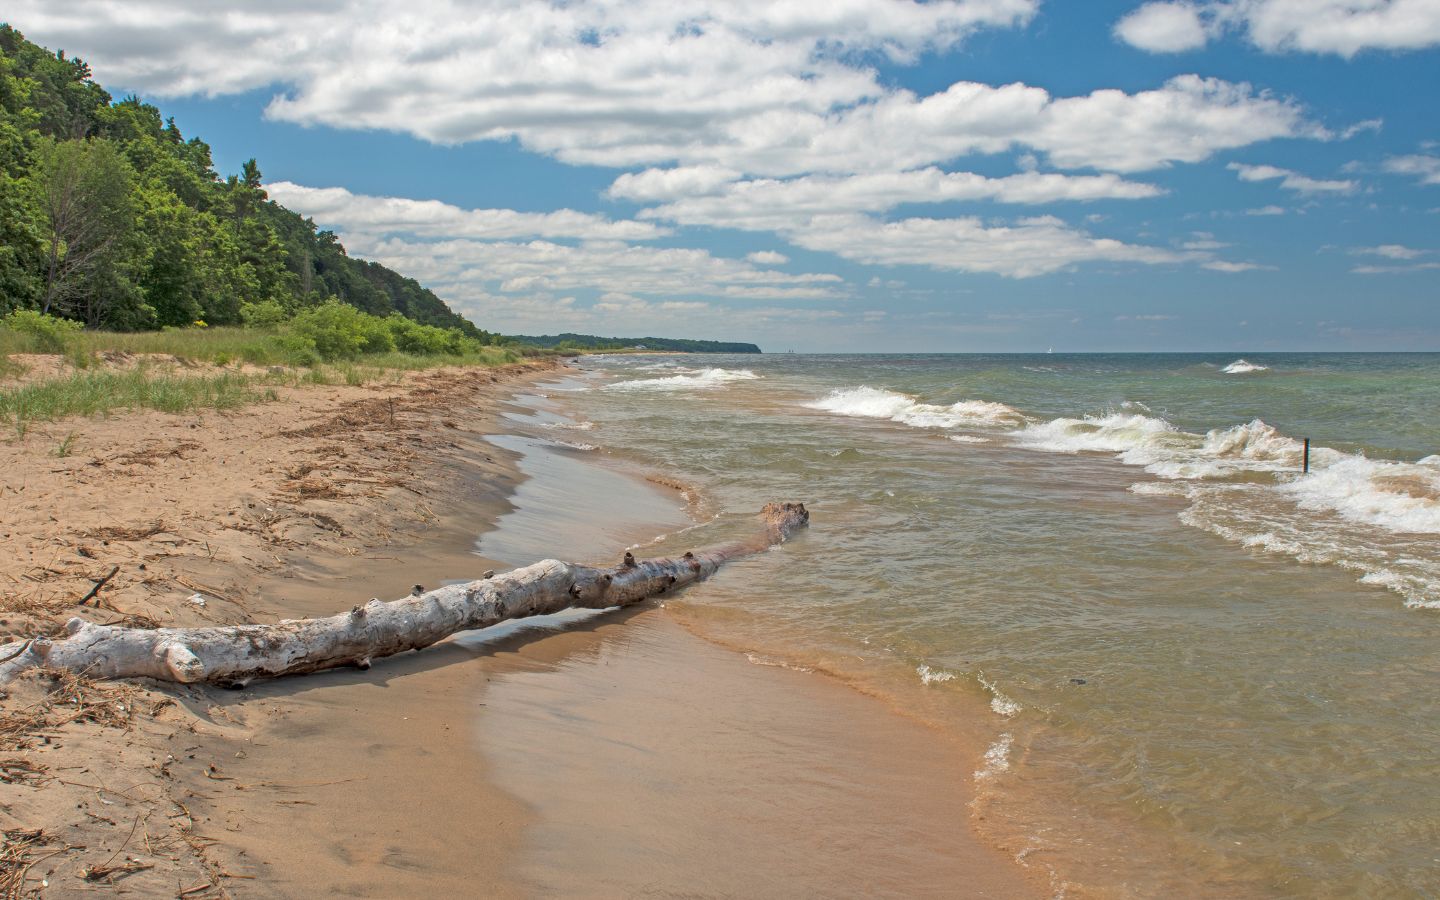 rolling waves lapping the shore of the beach in saugatuck duen state park with driftwood on the sand and greenery on the dunes